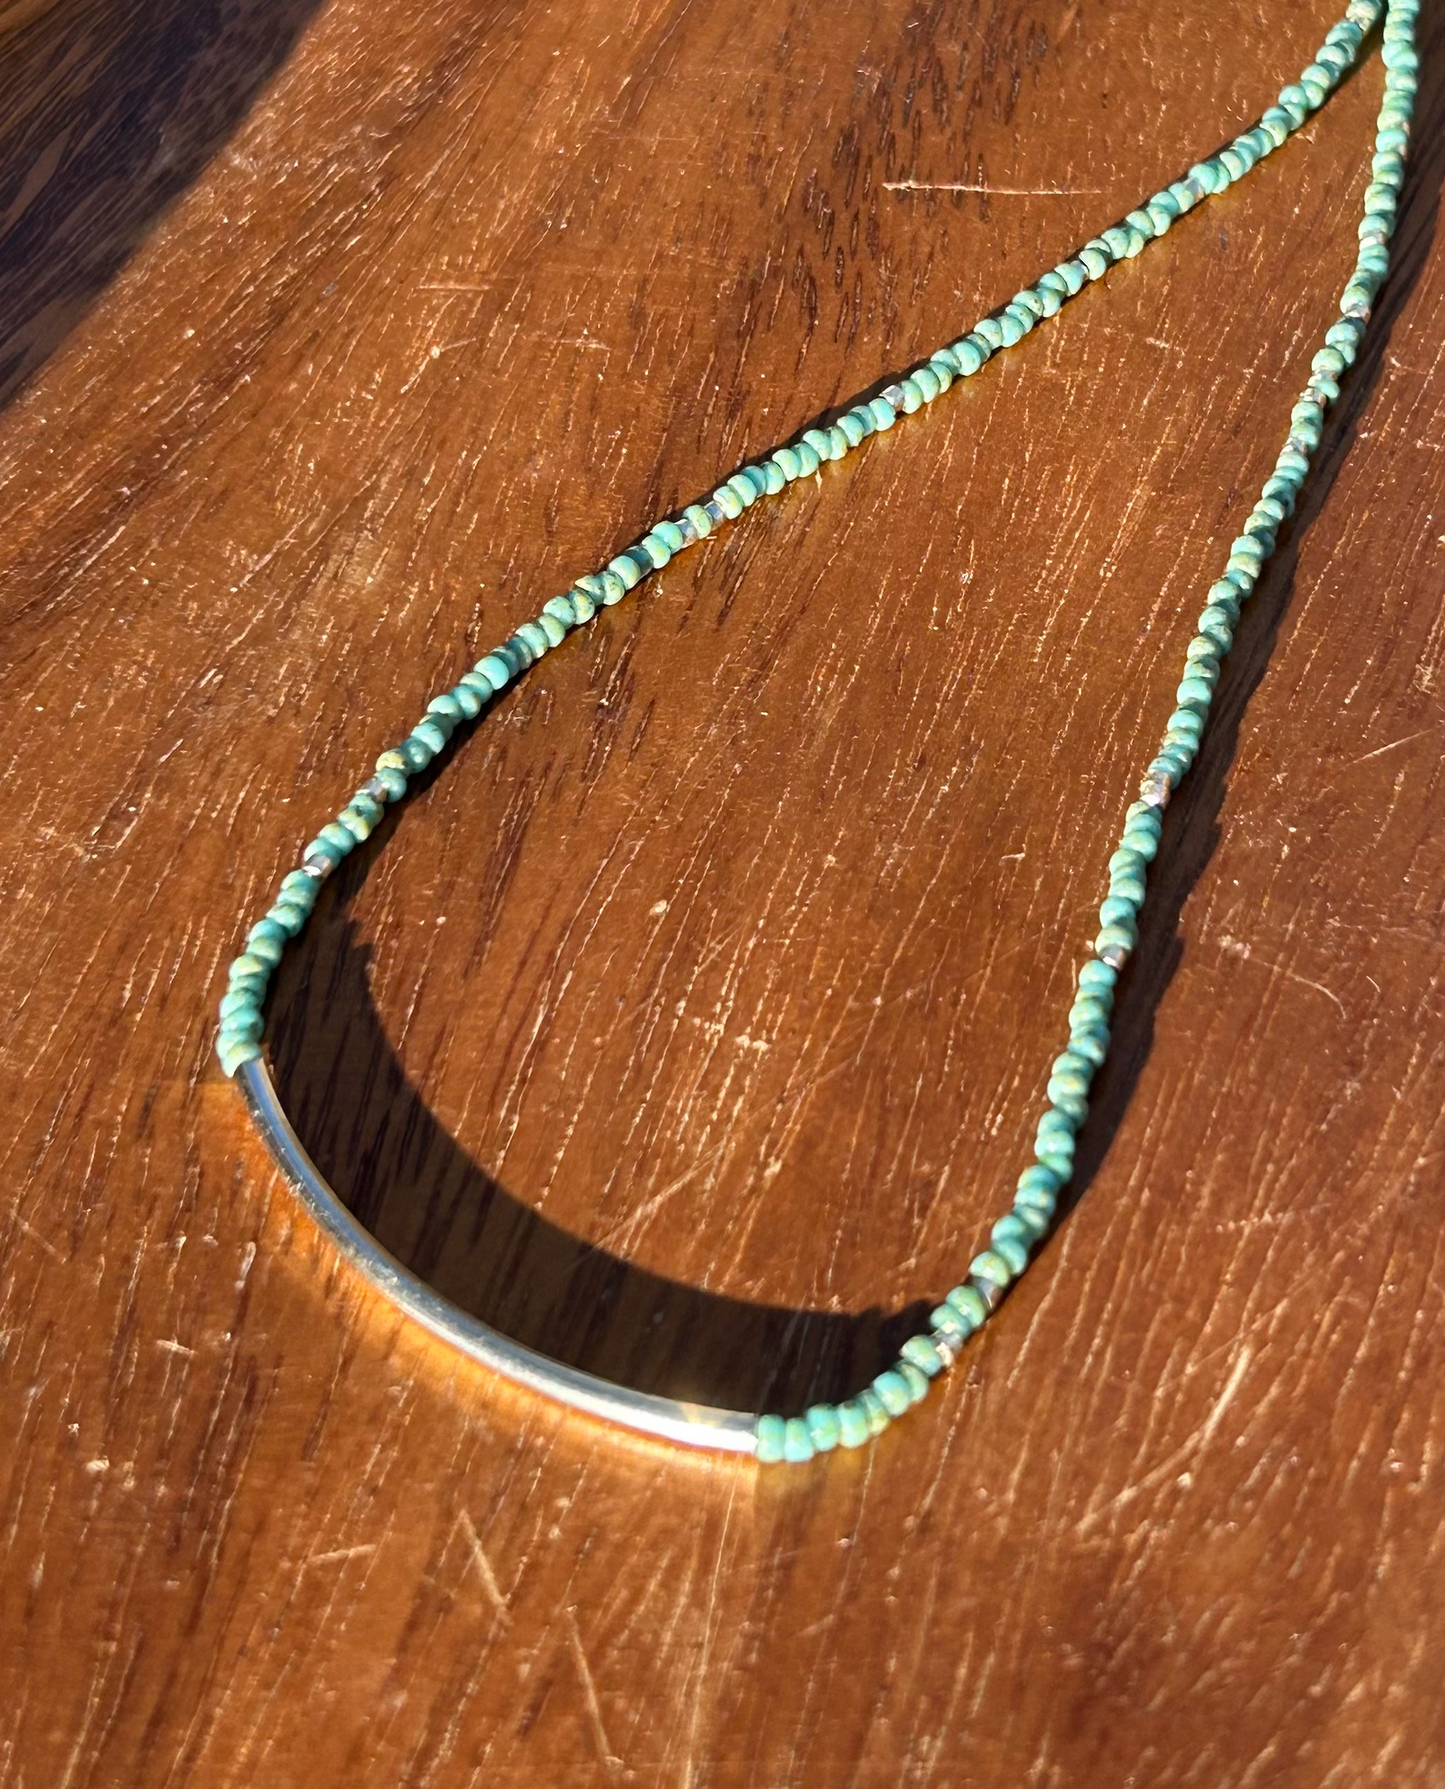 Sage Green & Silver Boho Seed Bead Necklace with Silver Bar Charm